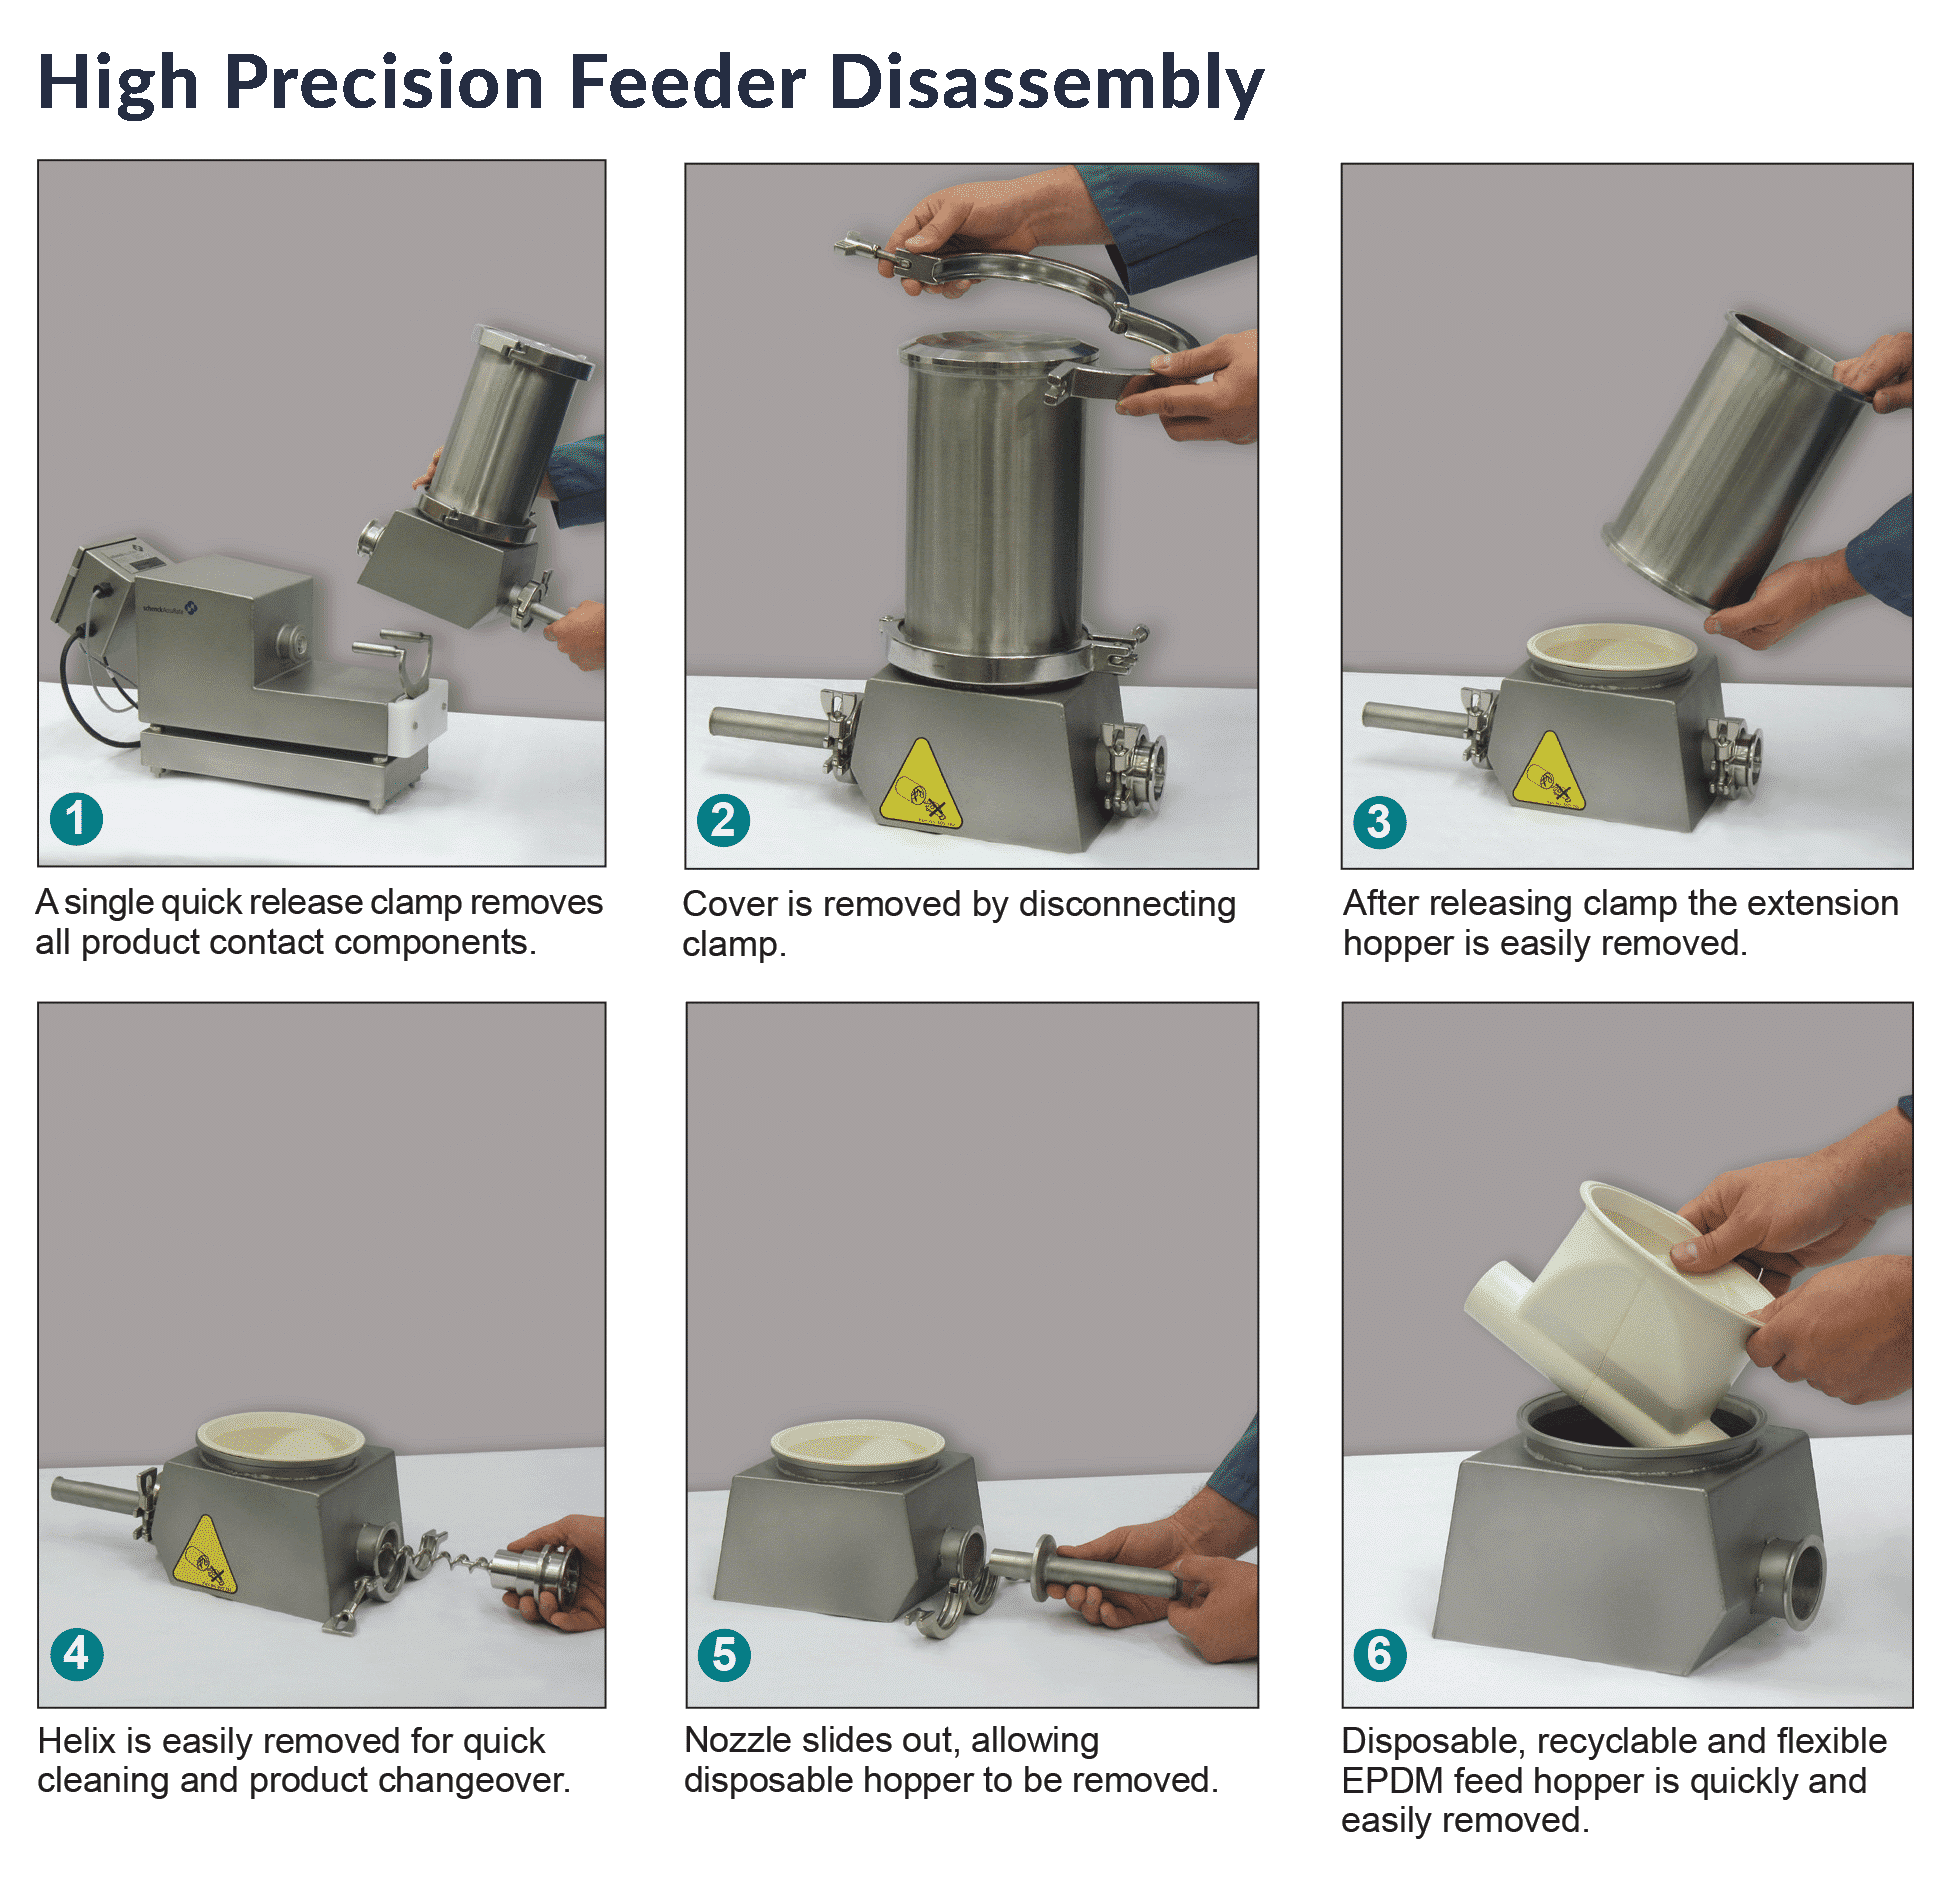 High Precision Feeder cleaning procedure